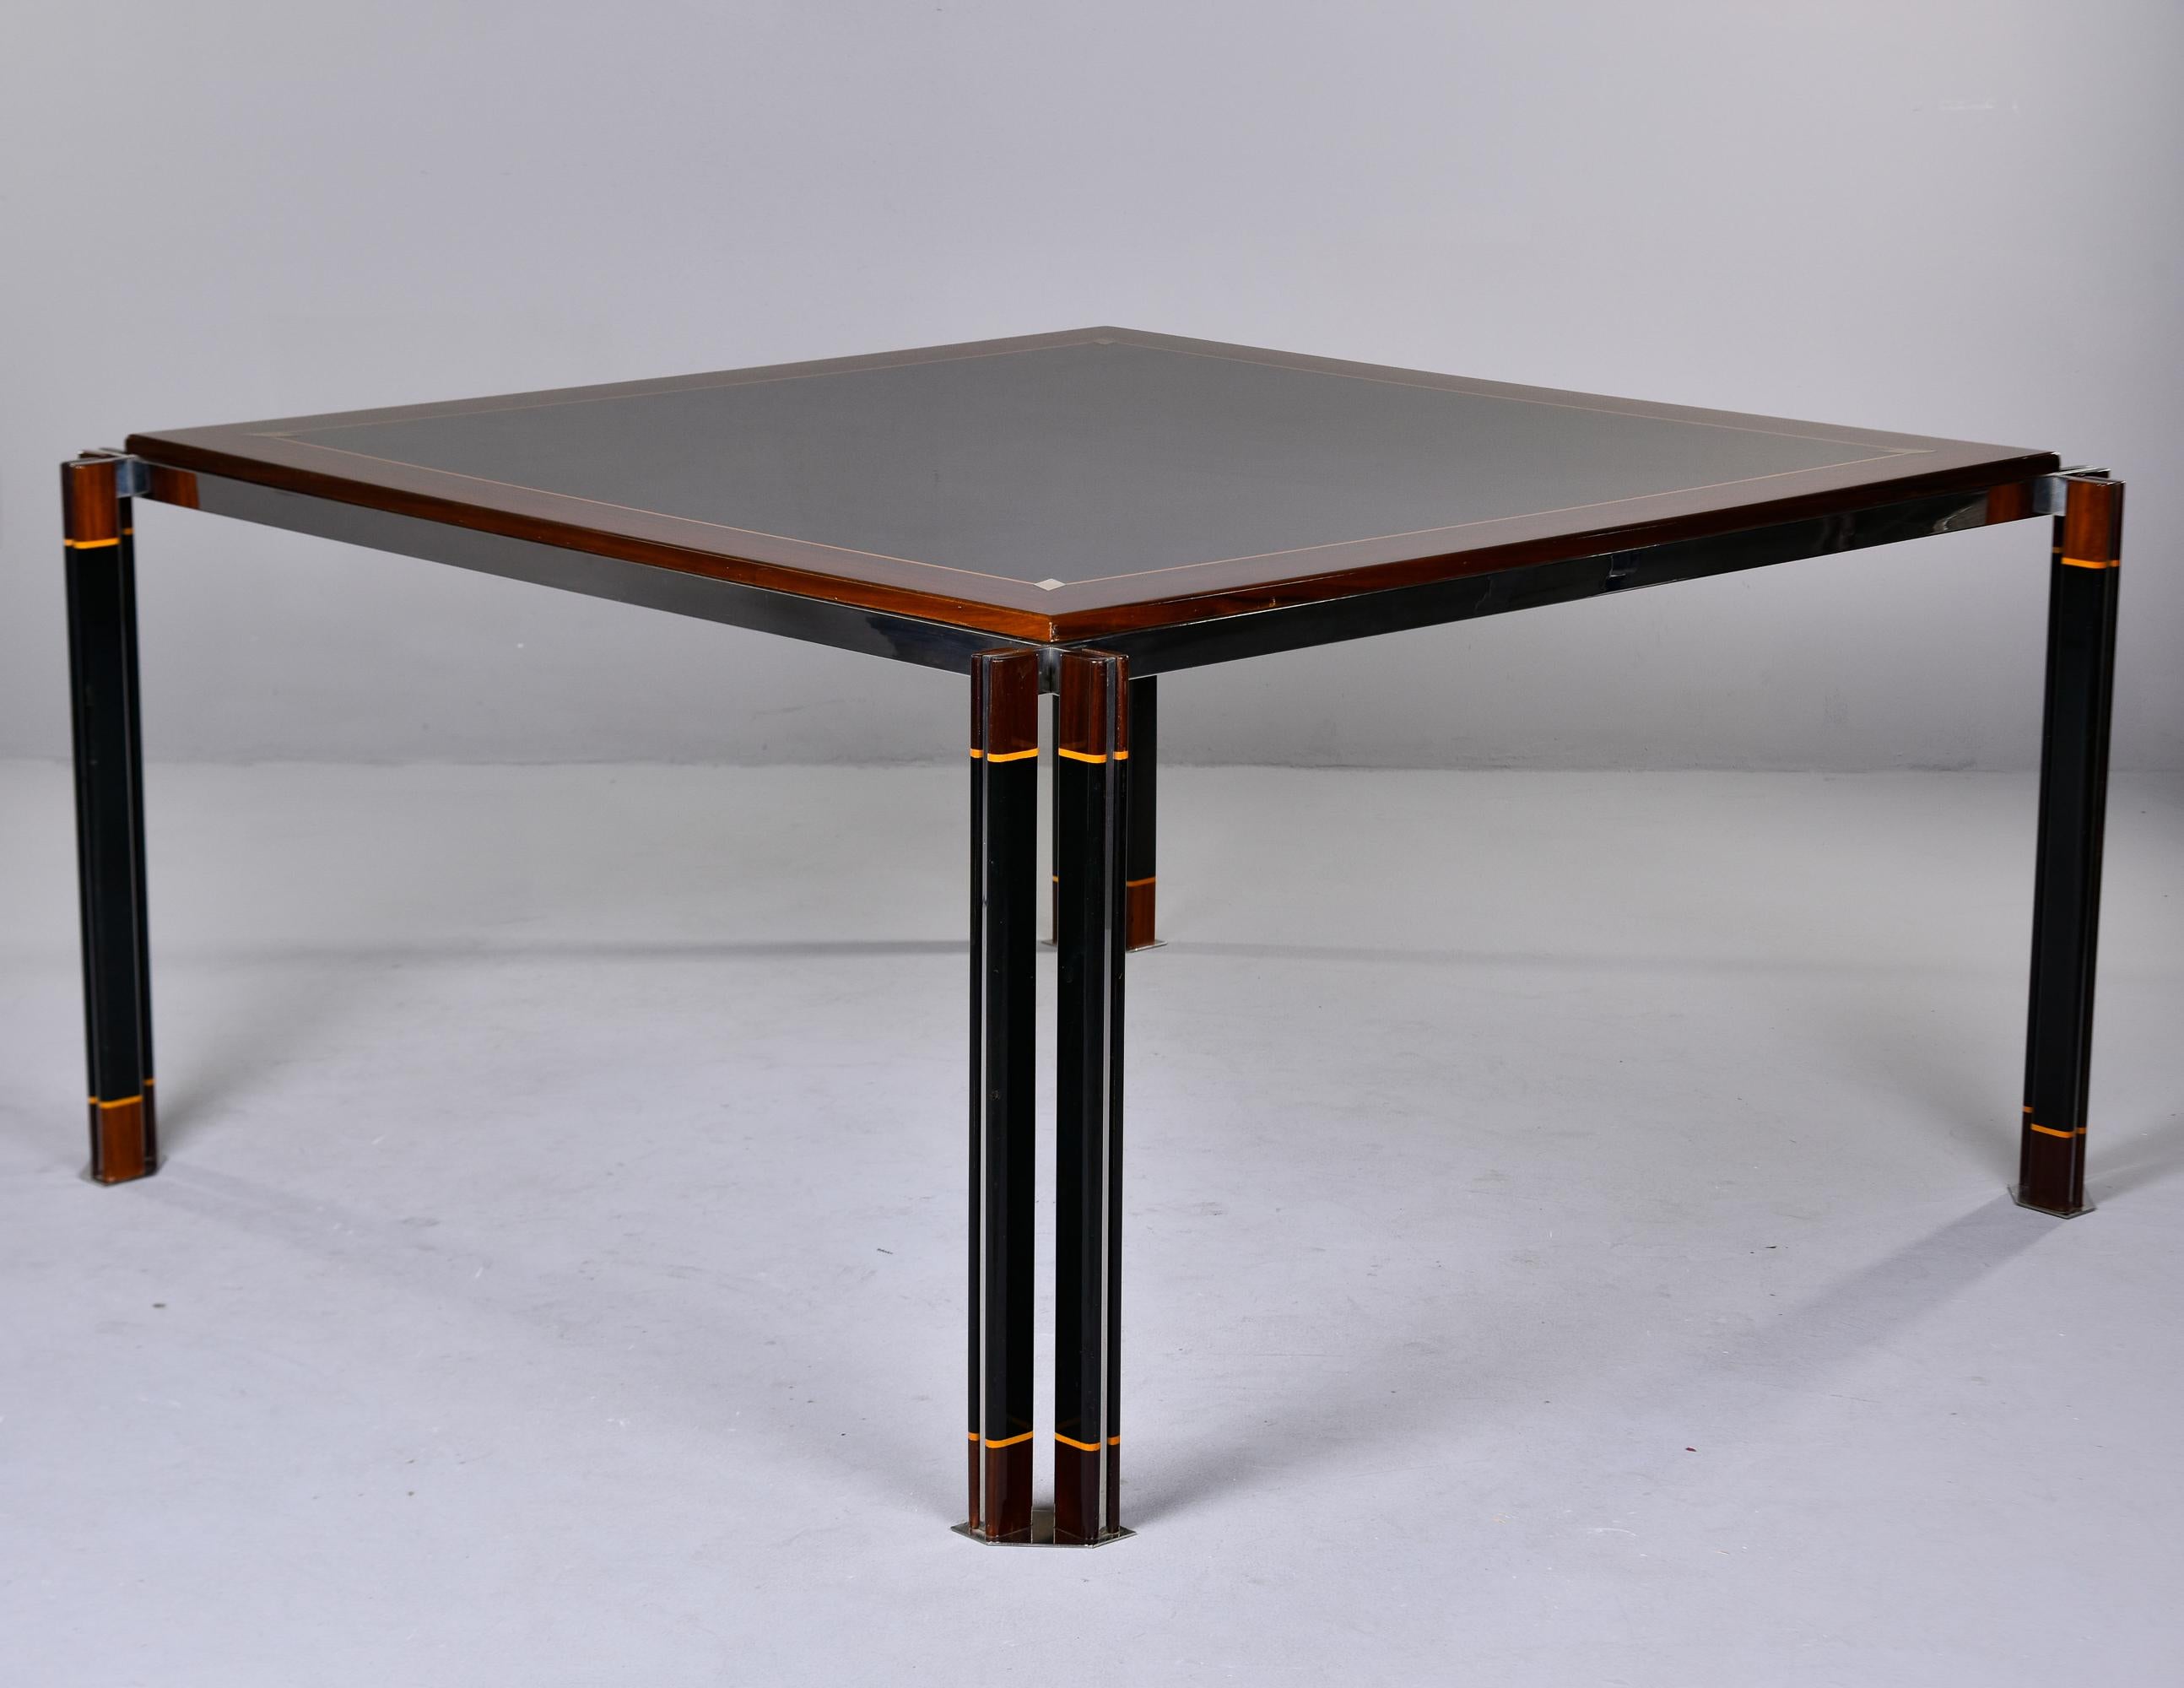 20th Century Italian Modernist Square Dining Table with Steel Detailing by Paolo Barracchia For Sale